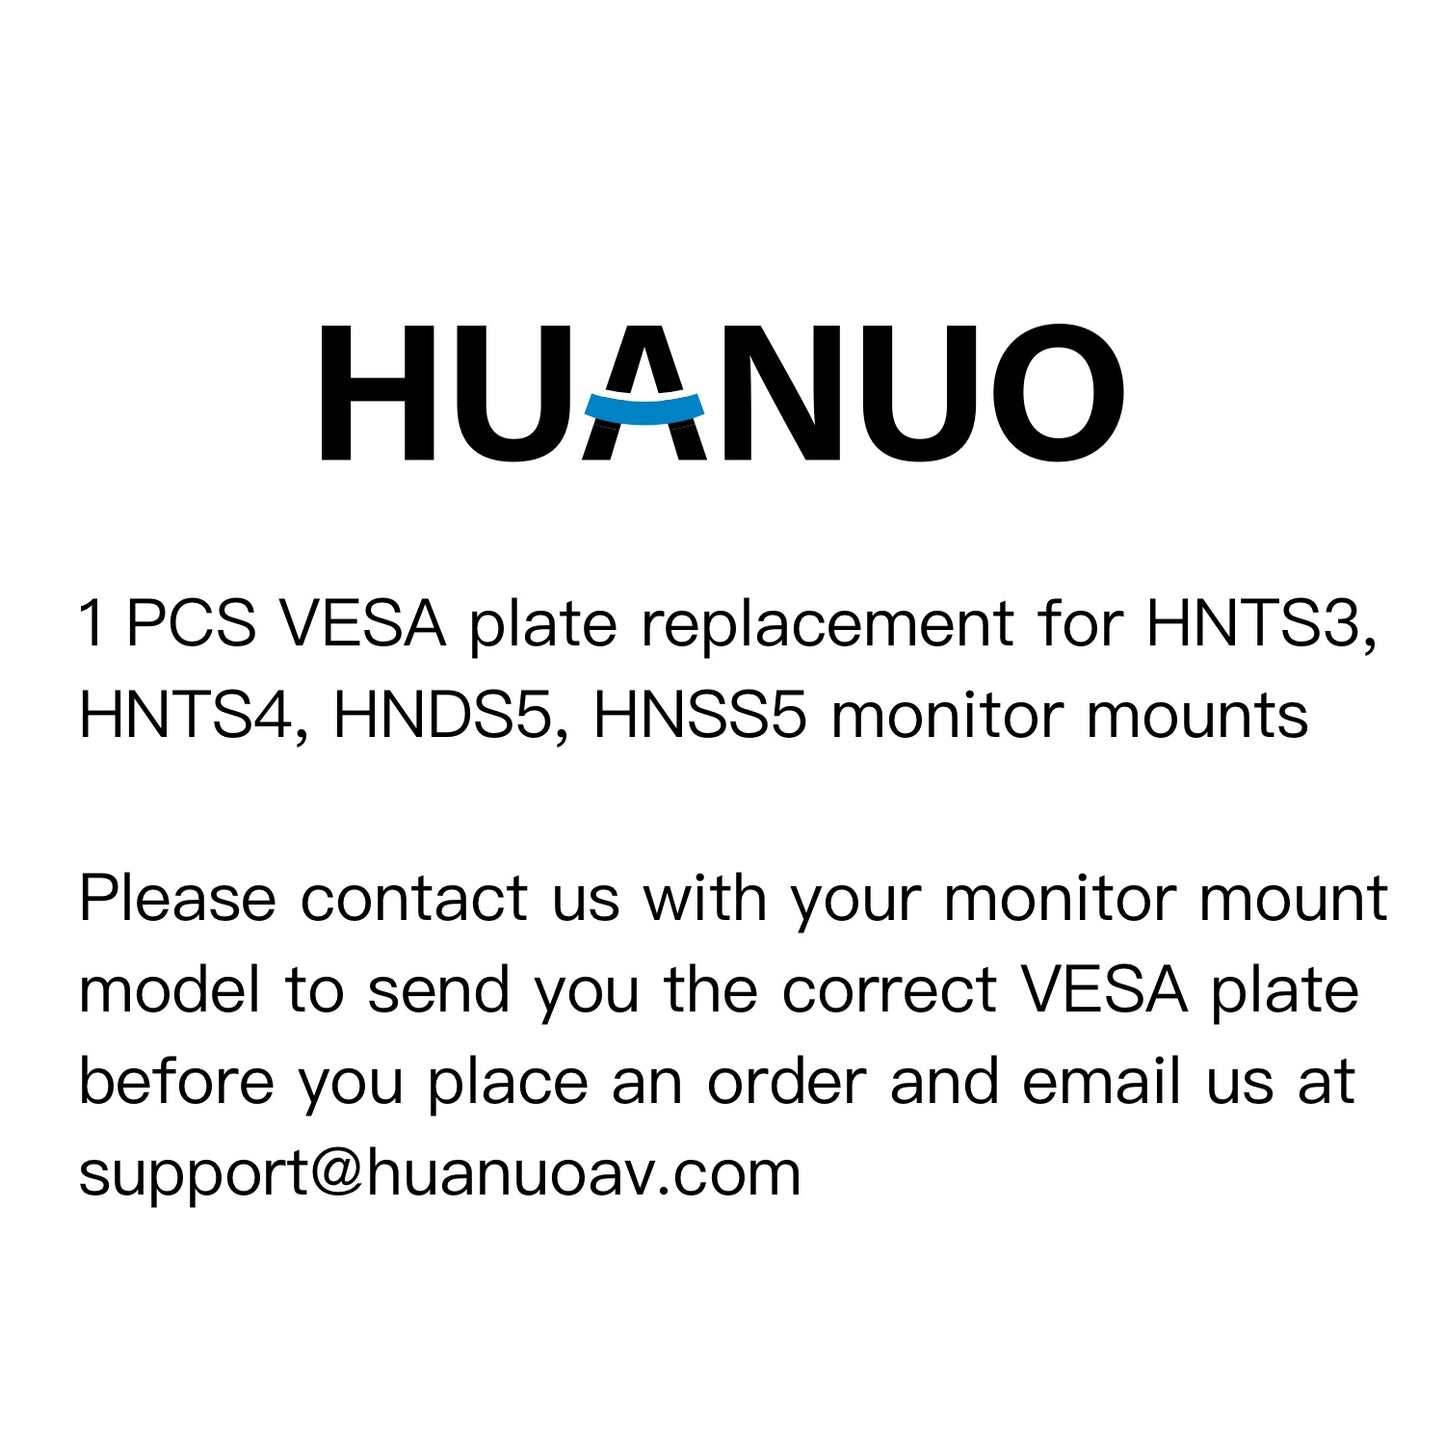 1 PCS VESA Plate Replacement For HNTS3, HNTS4, HNDS5, HNSS5 Monitor Mounts